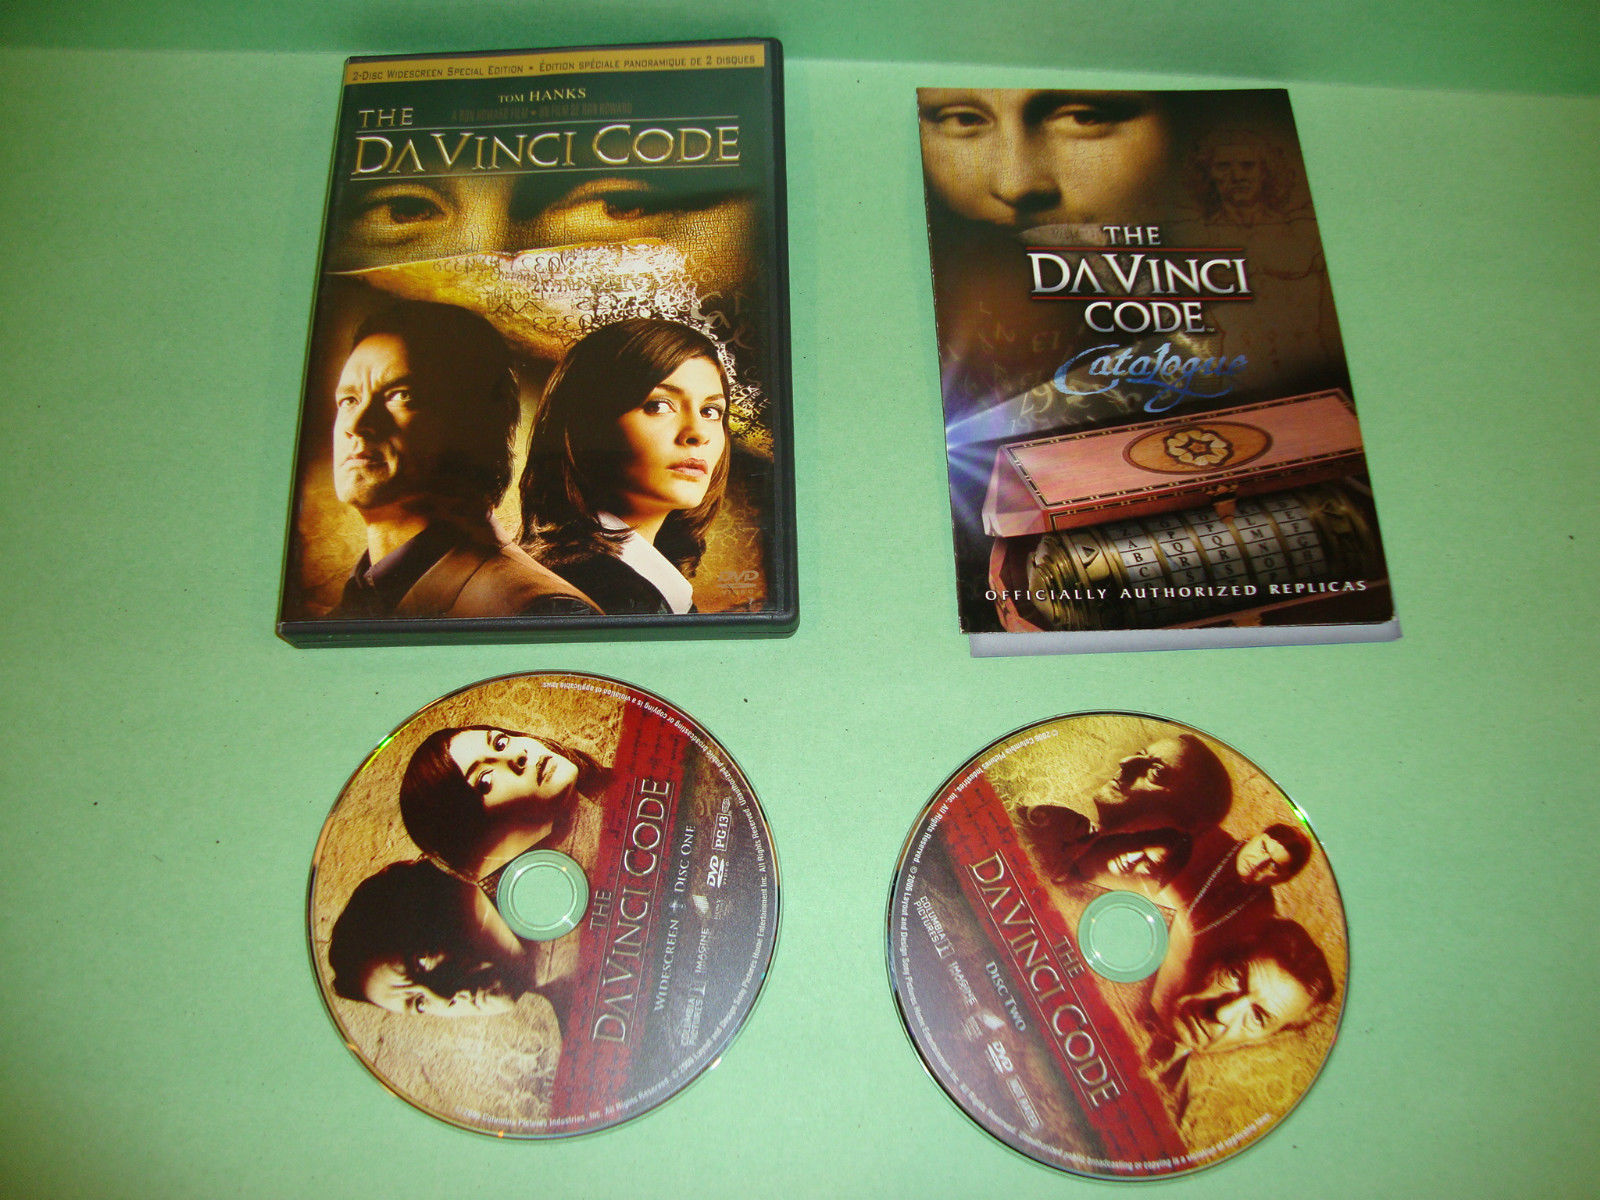 Primary image for The DaVinci Code (DVD, 2006, 2-Disc Set)